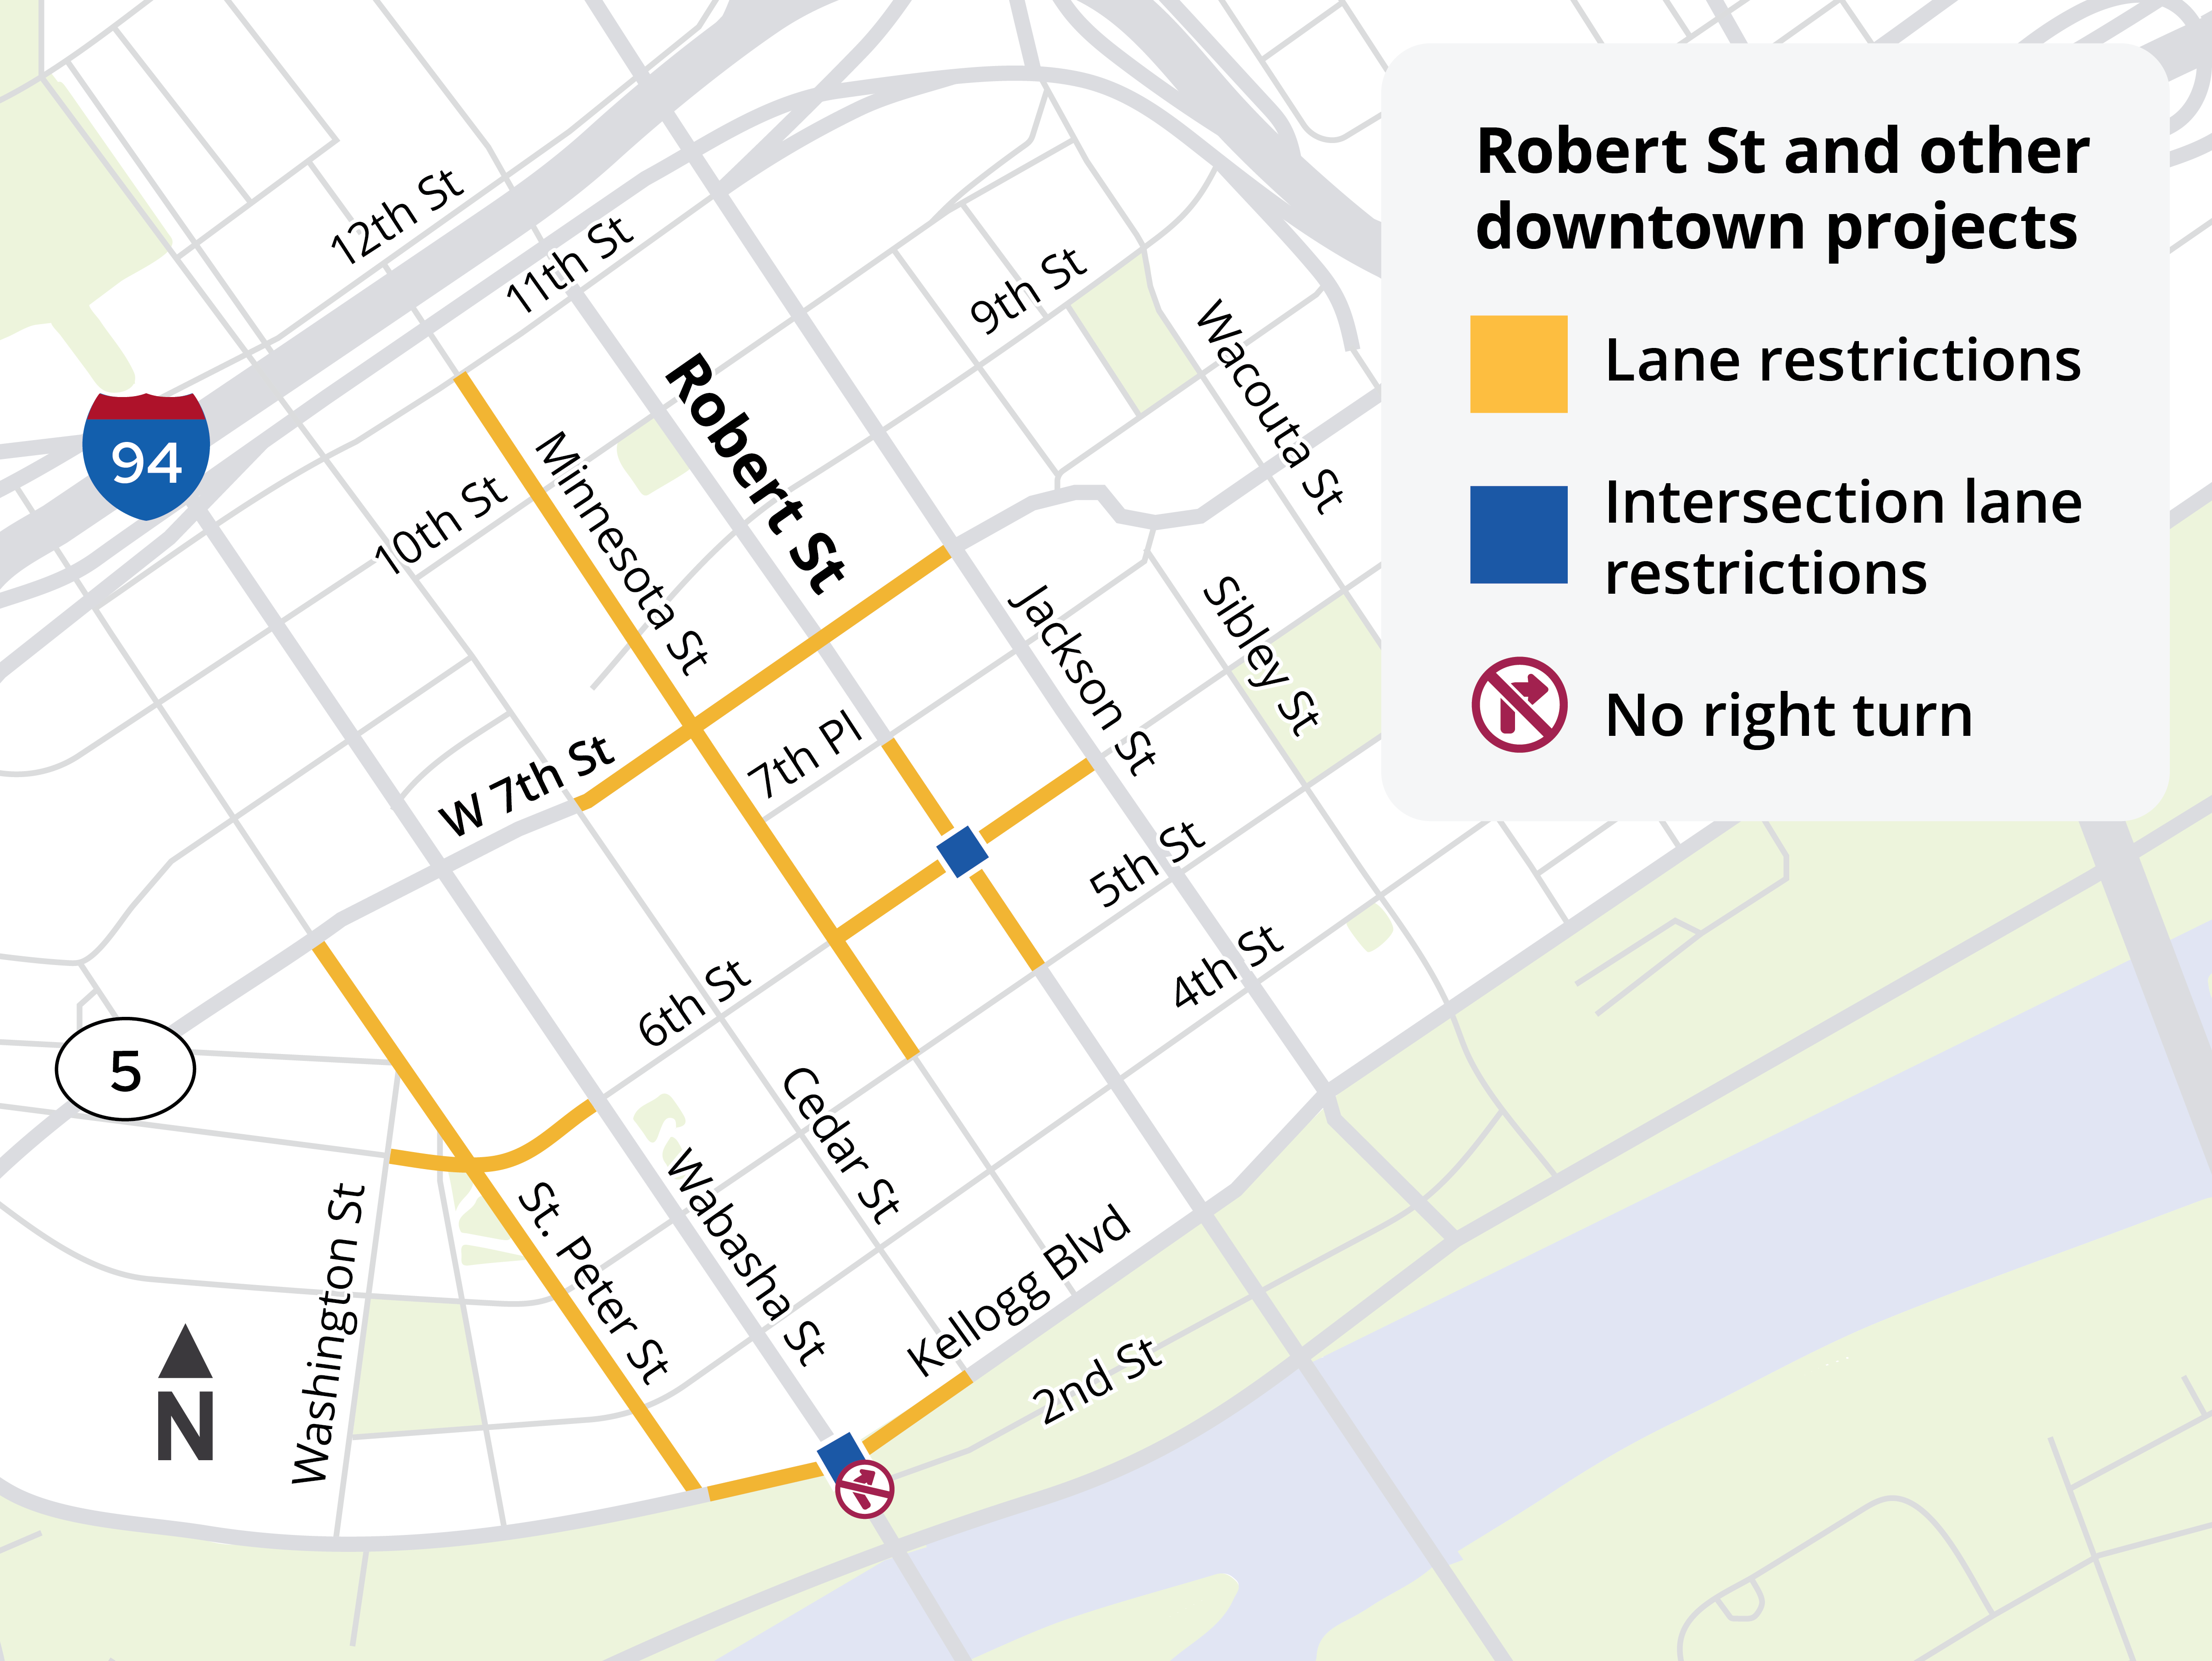 Map of downtown Saint Paul showing lane restrictions due to construction.